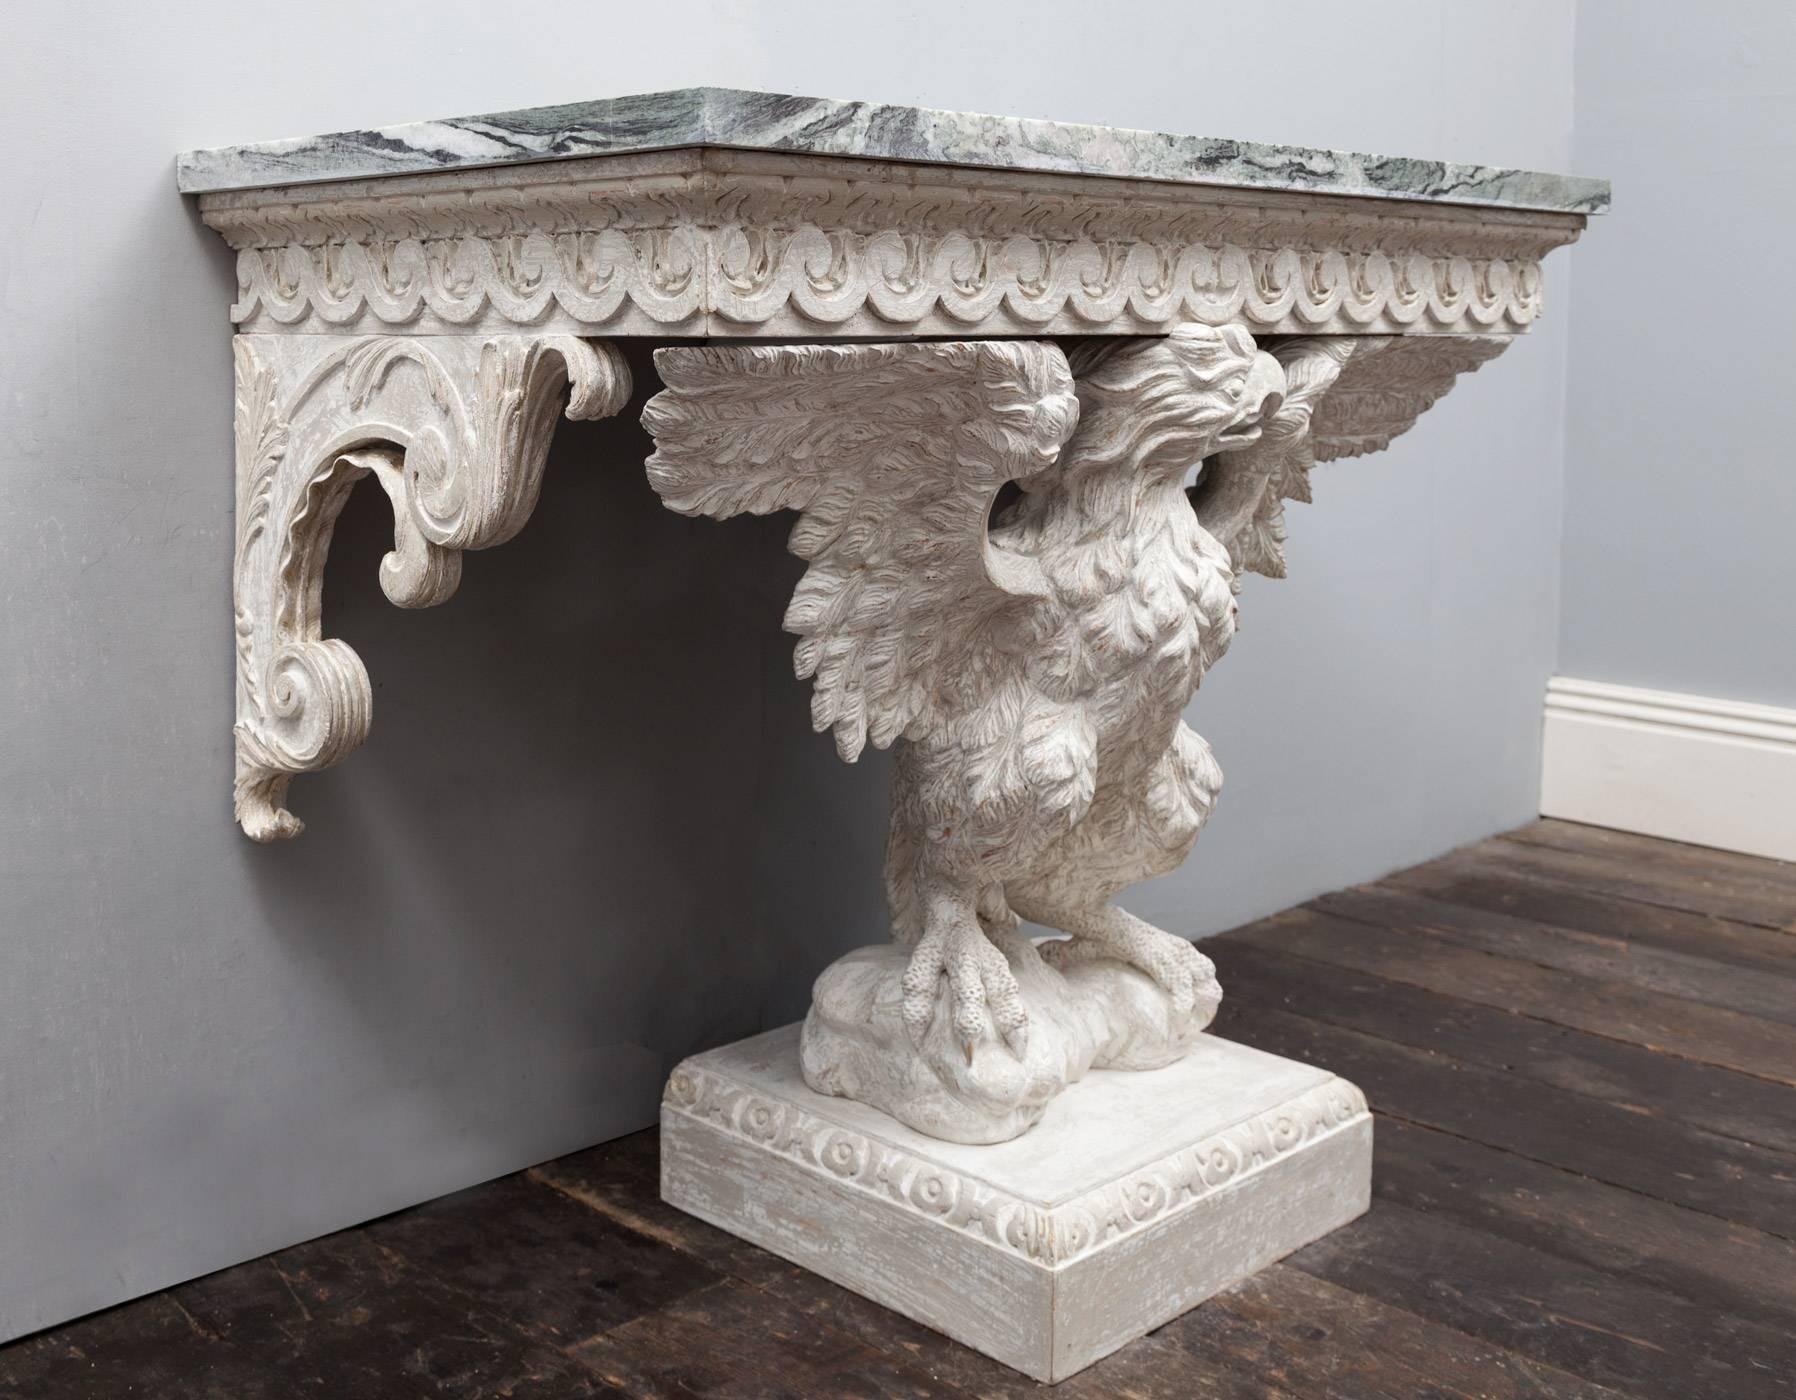 A magnificent pair of eagle console tables in the George II Palladian style. The Connemara marble tops are of the finest cut, displaying great veining and variation of colours. Each marble top is supported by a vitruvian scroll frieze, under two